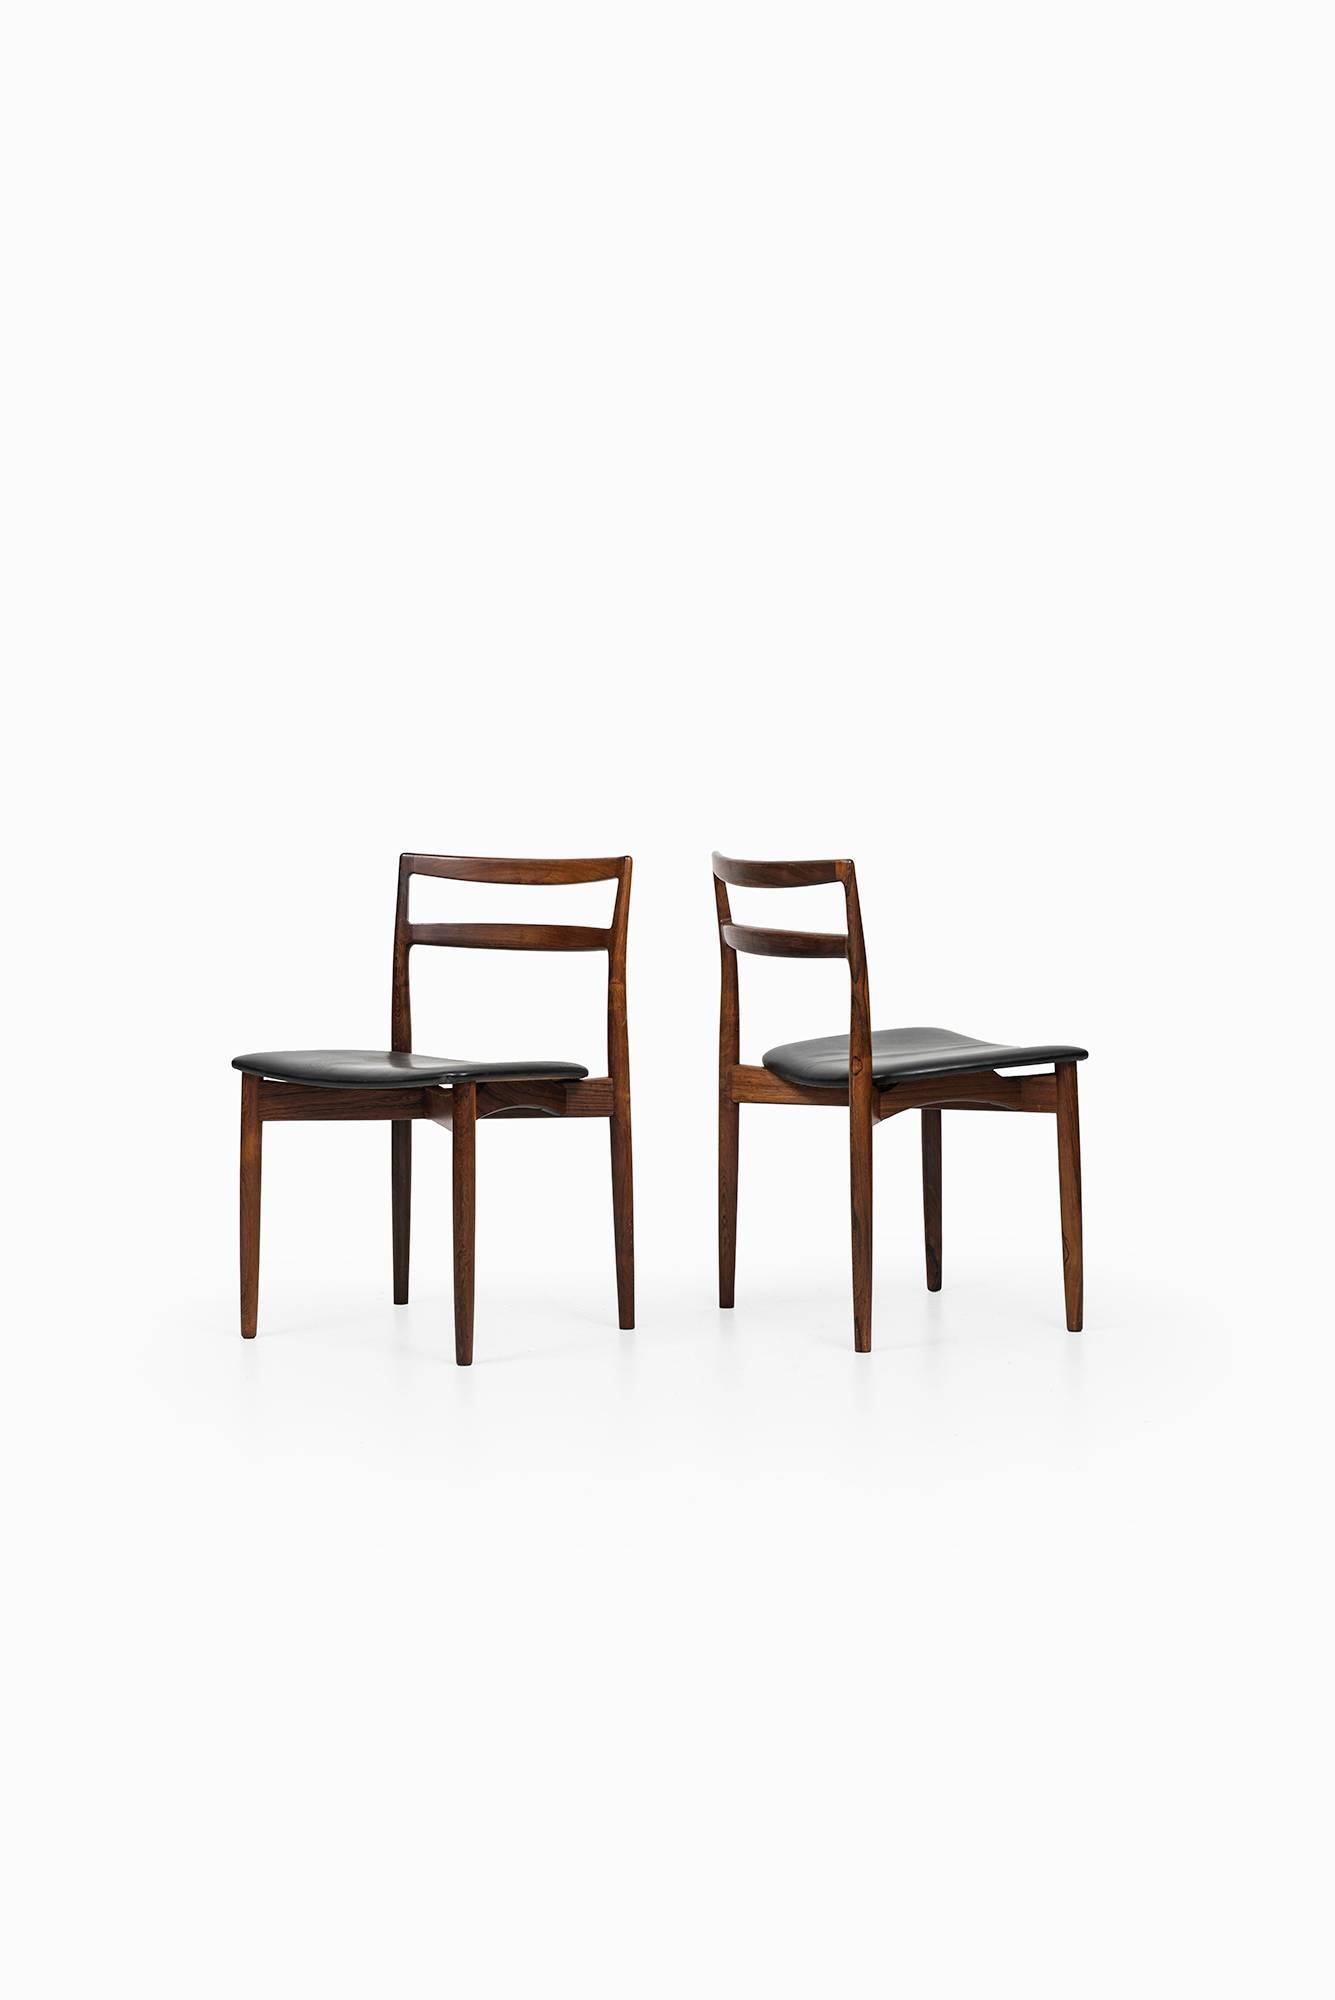 Rare set of eight dining chairs model 61 designed by Harry Østergaard. Produced by Randers møbelfabrik in Denmark.